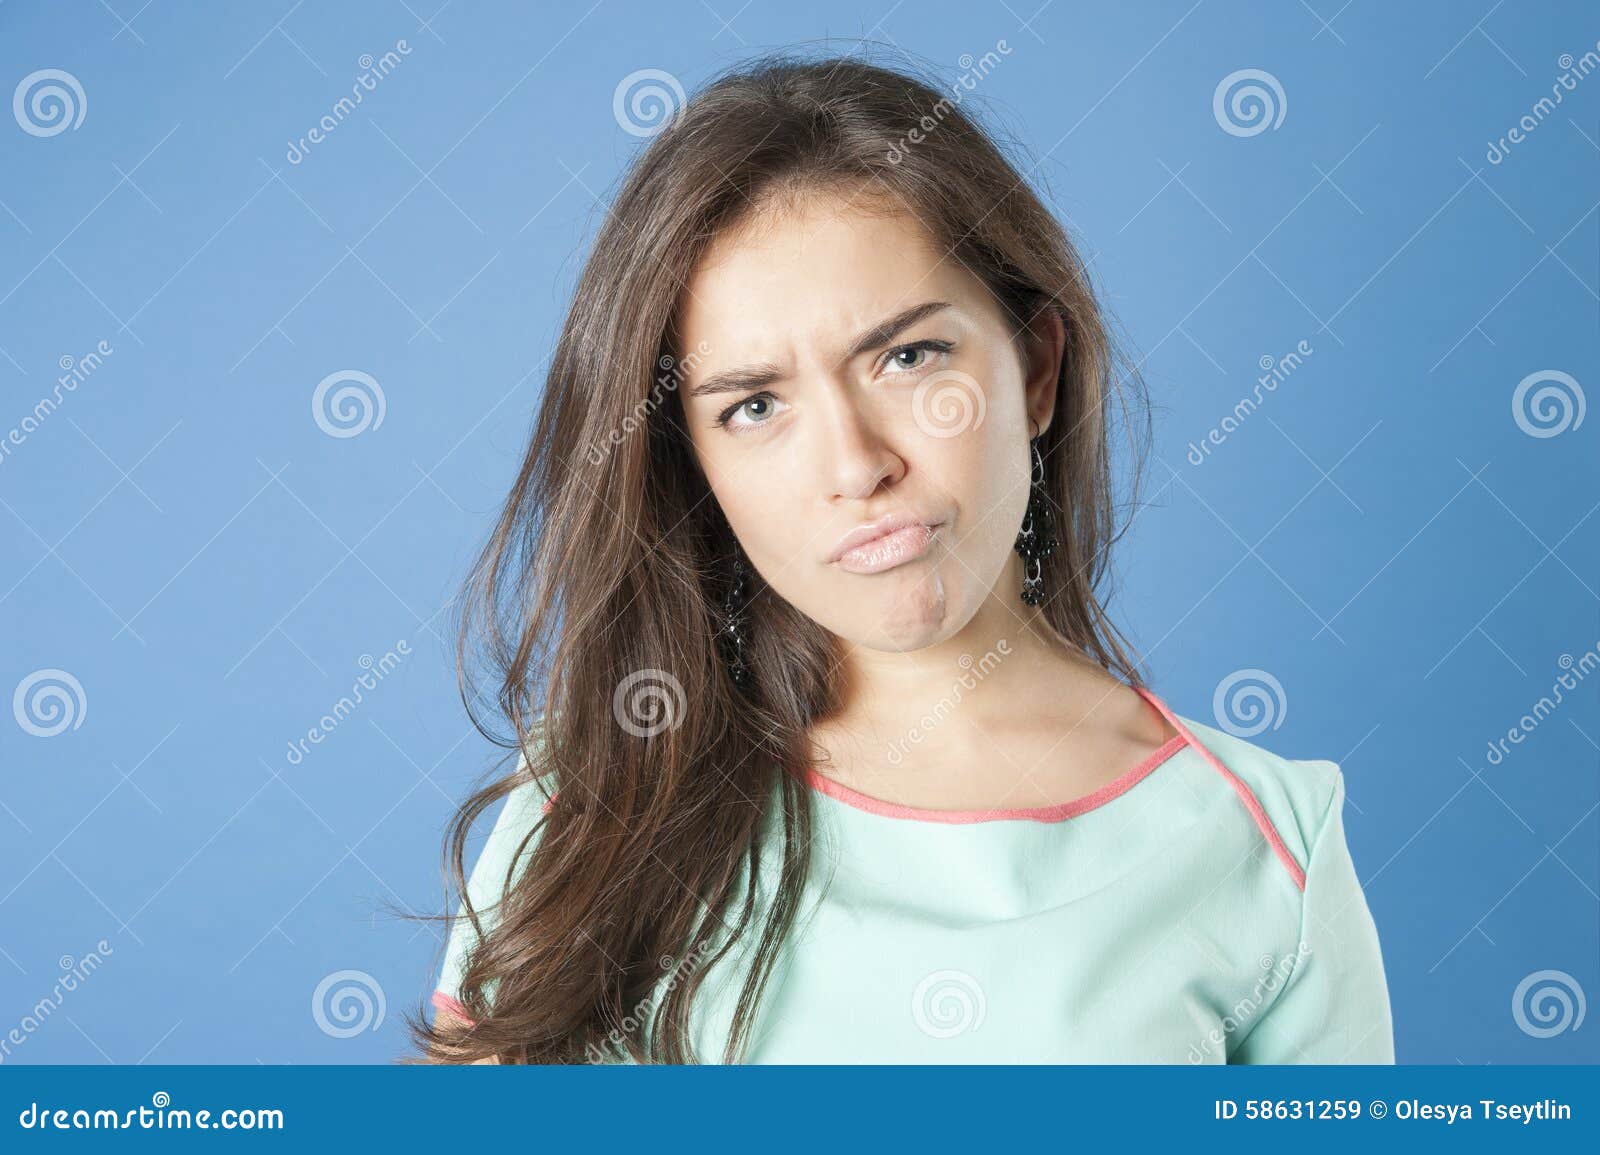 Young Girl With Unhappy Expression Stock Image Image Of Color Portrait 58631259